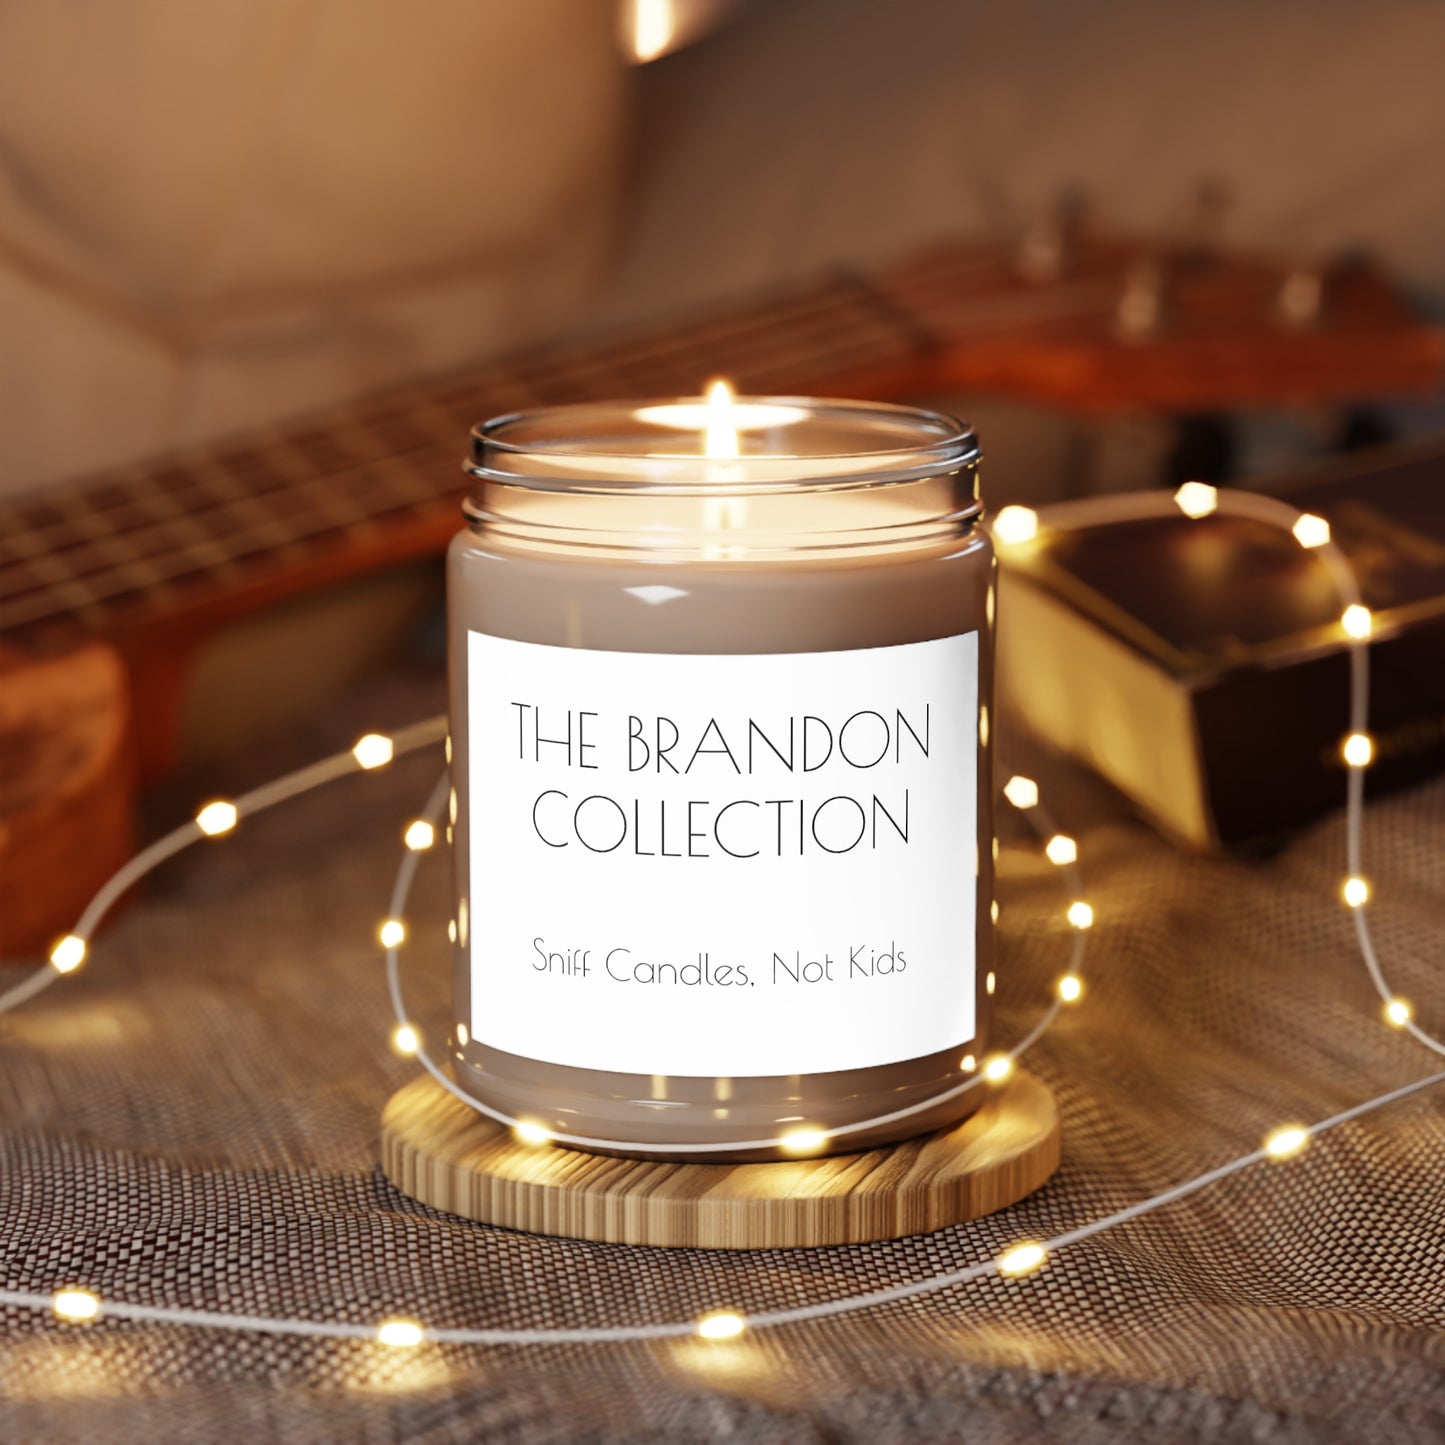 BRANDON COLLECTION Scented Candles, 9oz